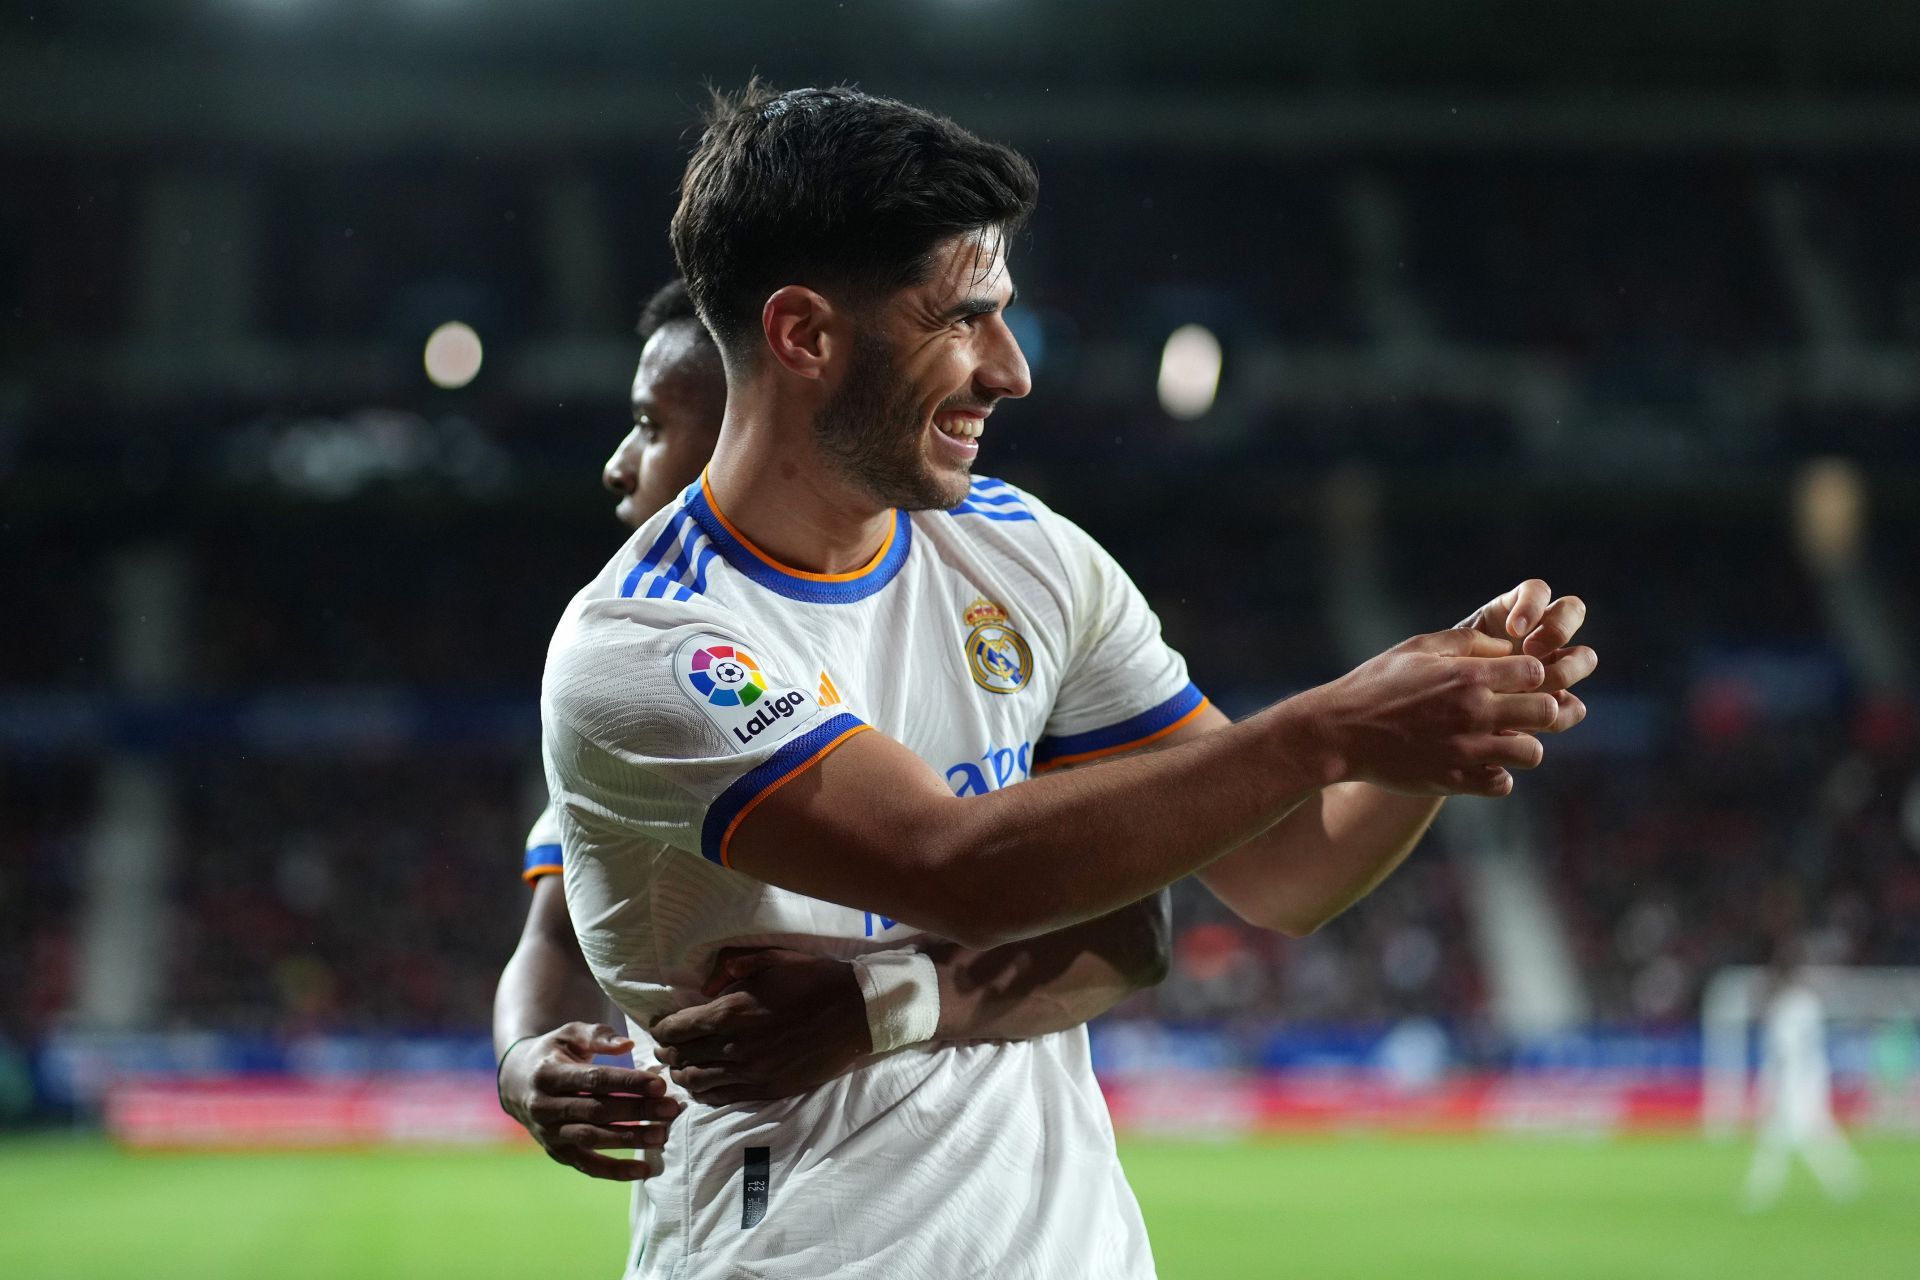 Marco Asensio is yet to live up to his potential